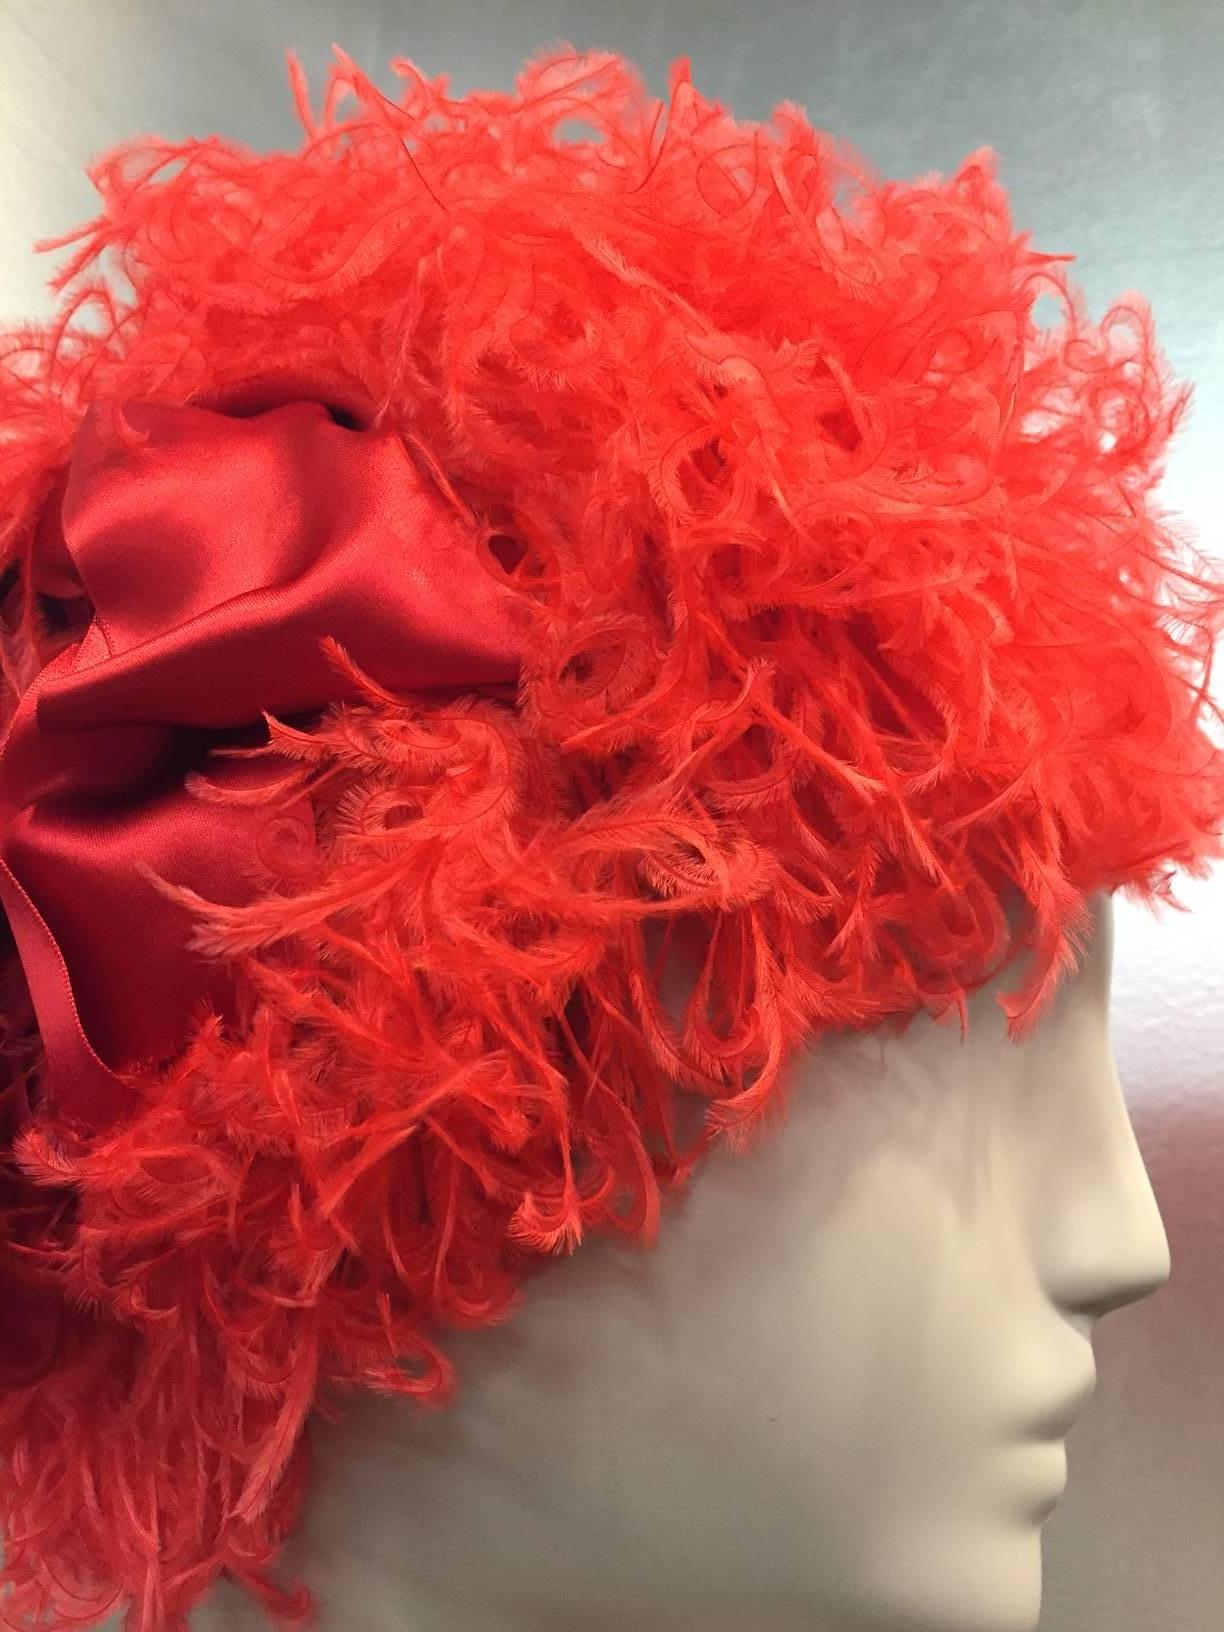 1960s Trésor structured coral red curled ostrich feather cocktail hat with charming red satin side bow  Can't do a thing with your hair?  Voila! This will take care of it. 